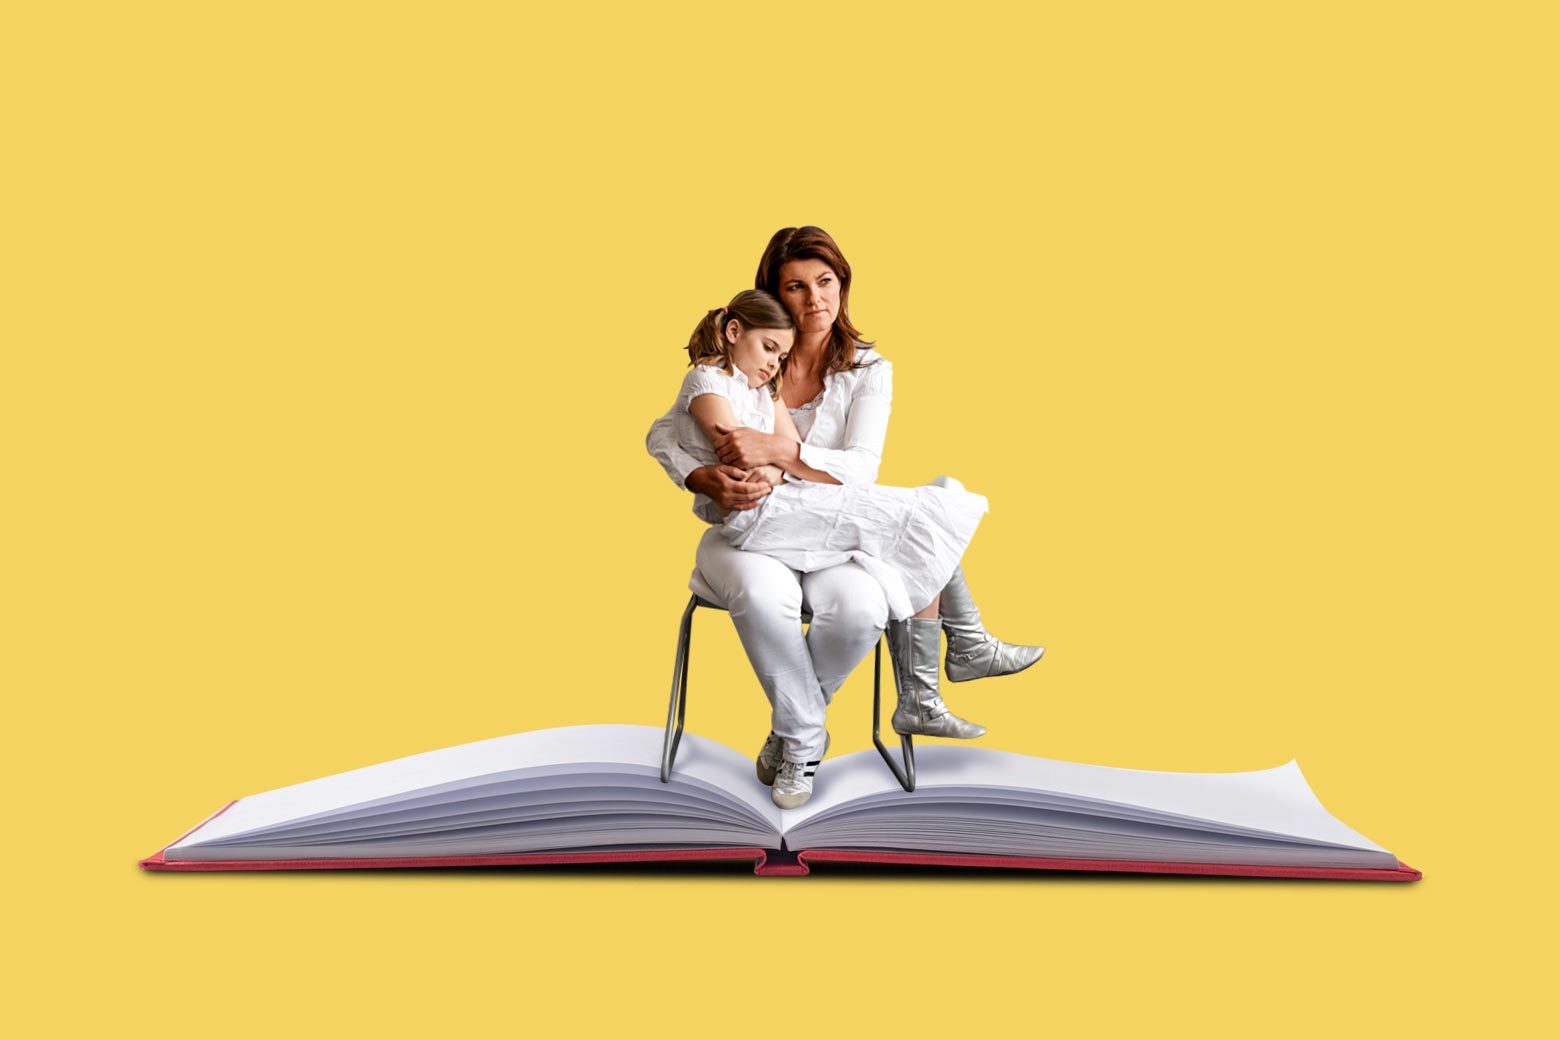 A woman sits on a chair and holds her daughter. The chair is on an open book.